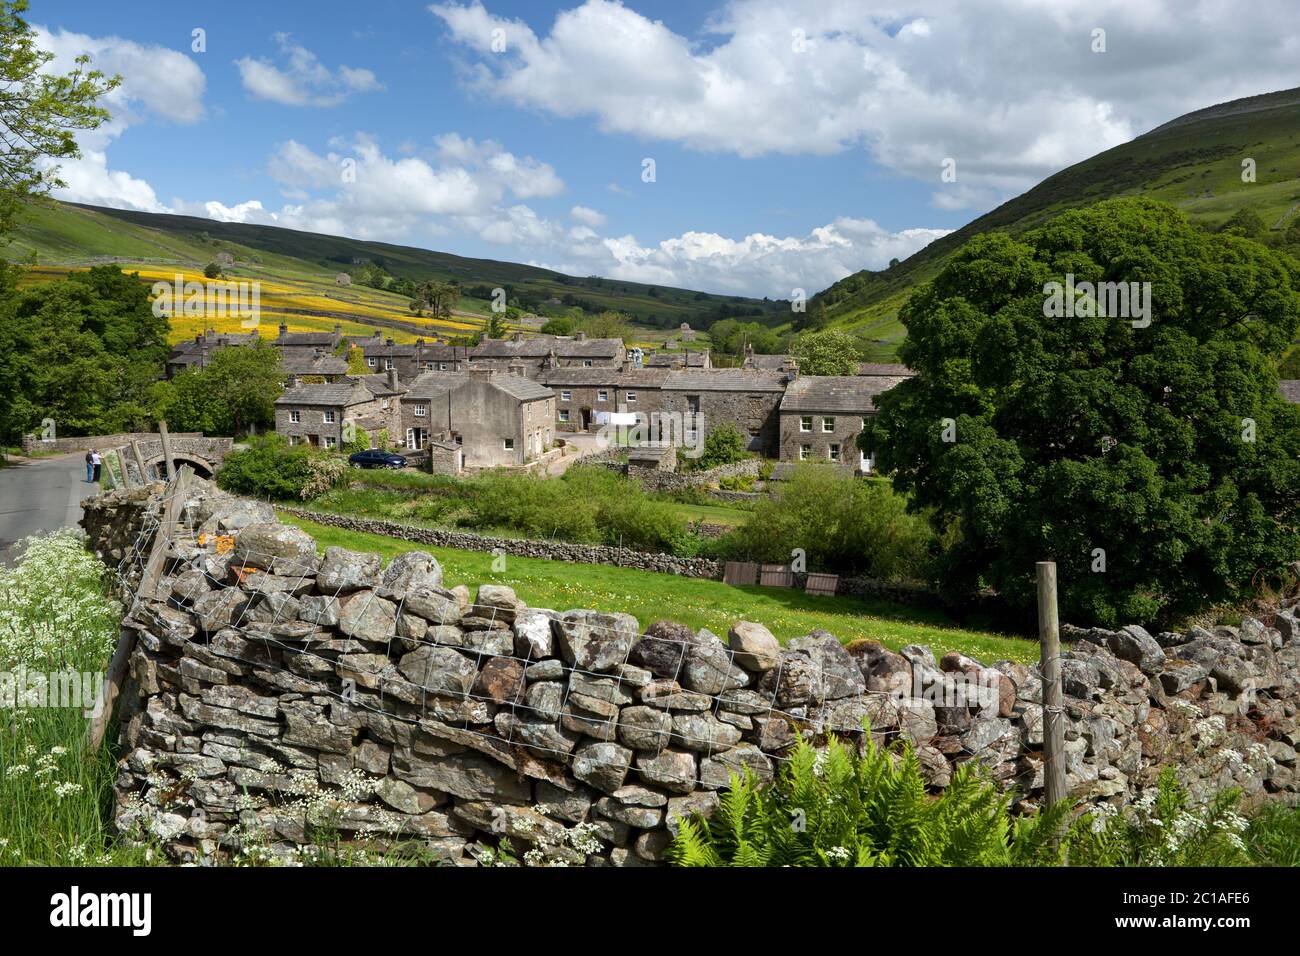 View over traditional dry stone wall to village of Thwaite in Swaledale valley, Thwaite, Yorkshire Dales National Park, North Yorkshire, England, UK Stock Photo